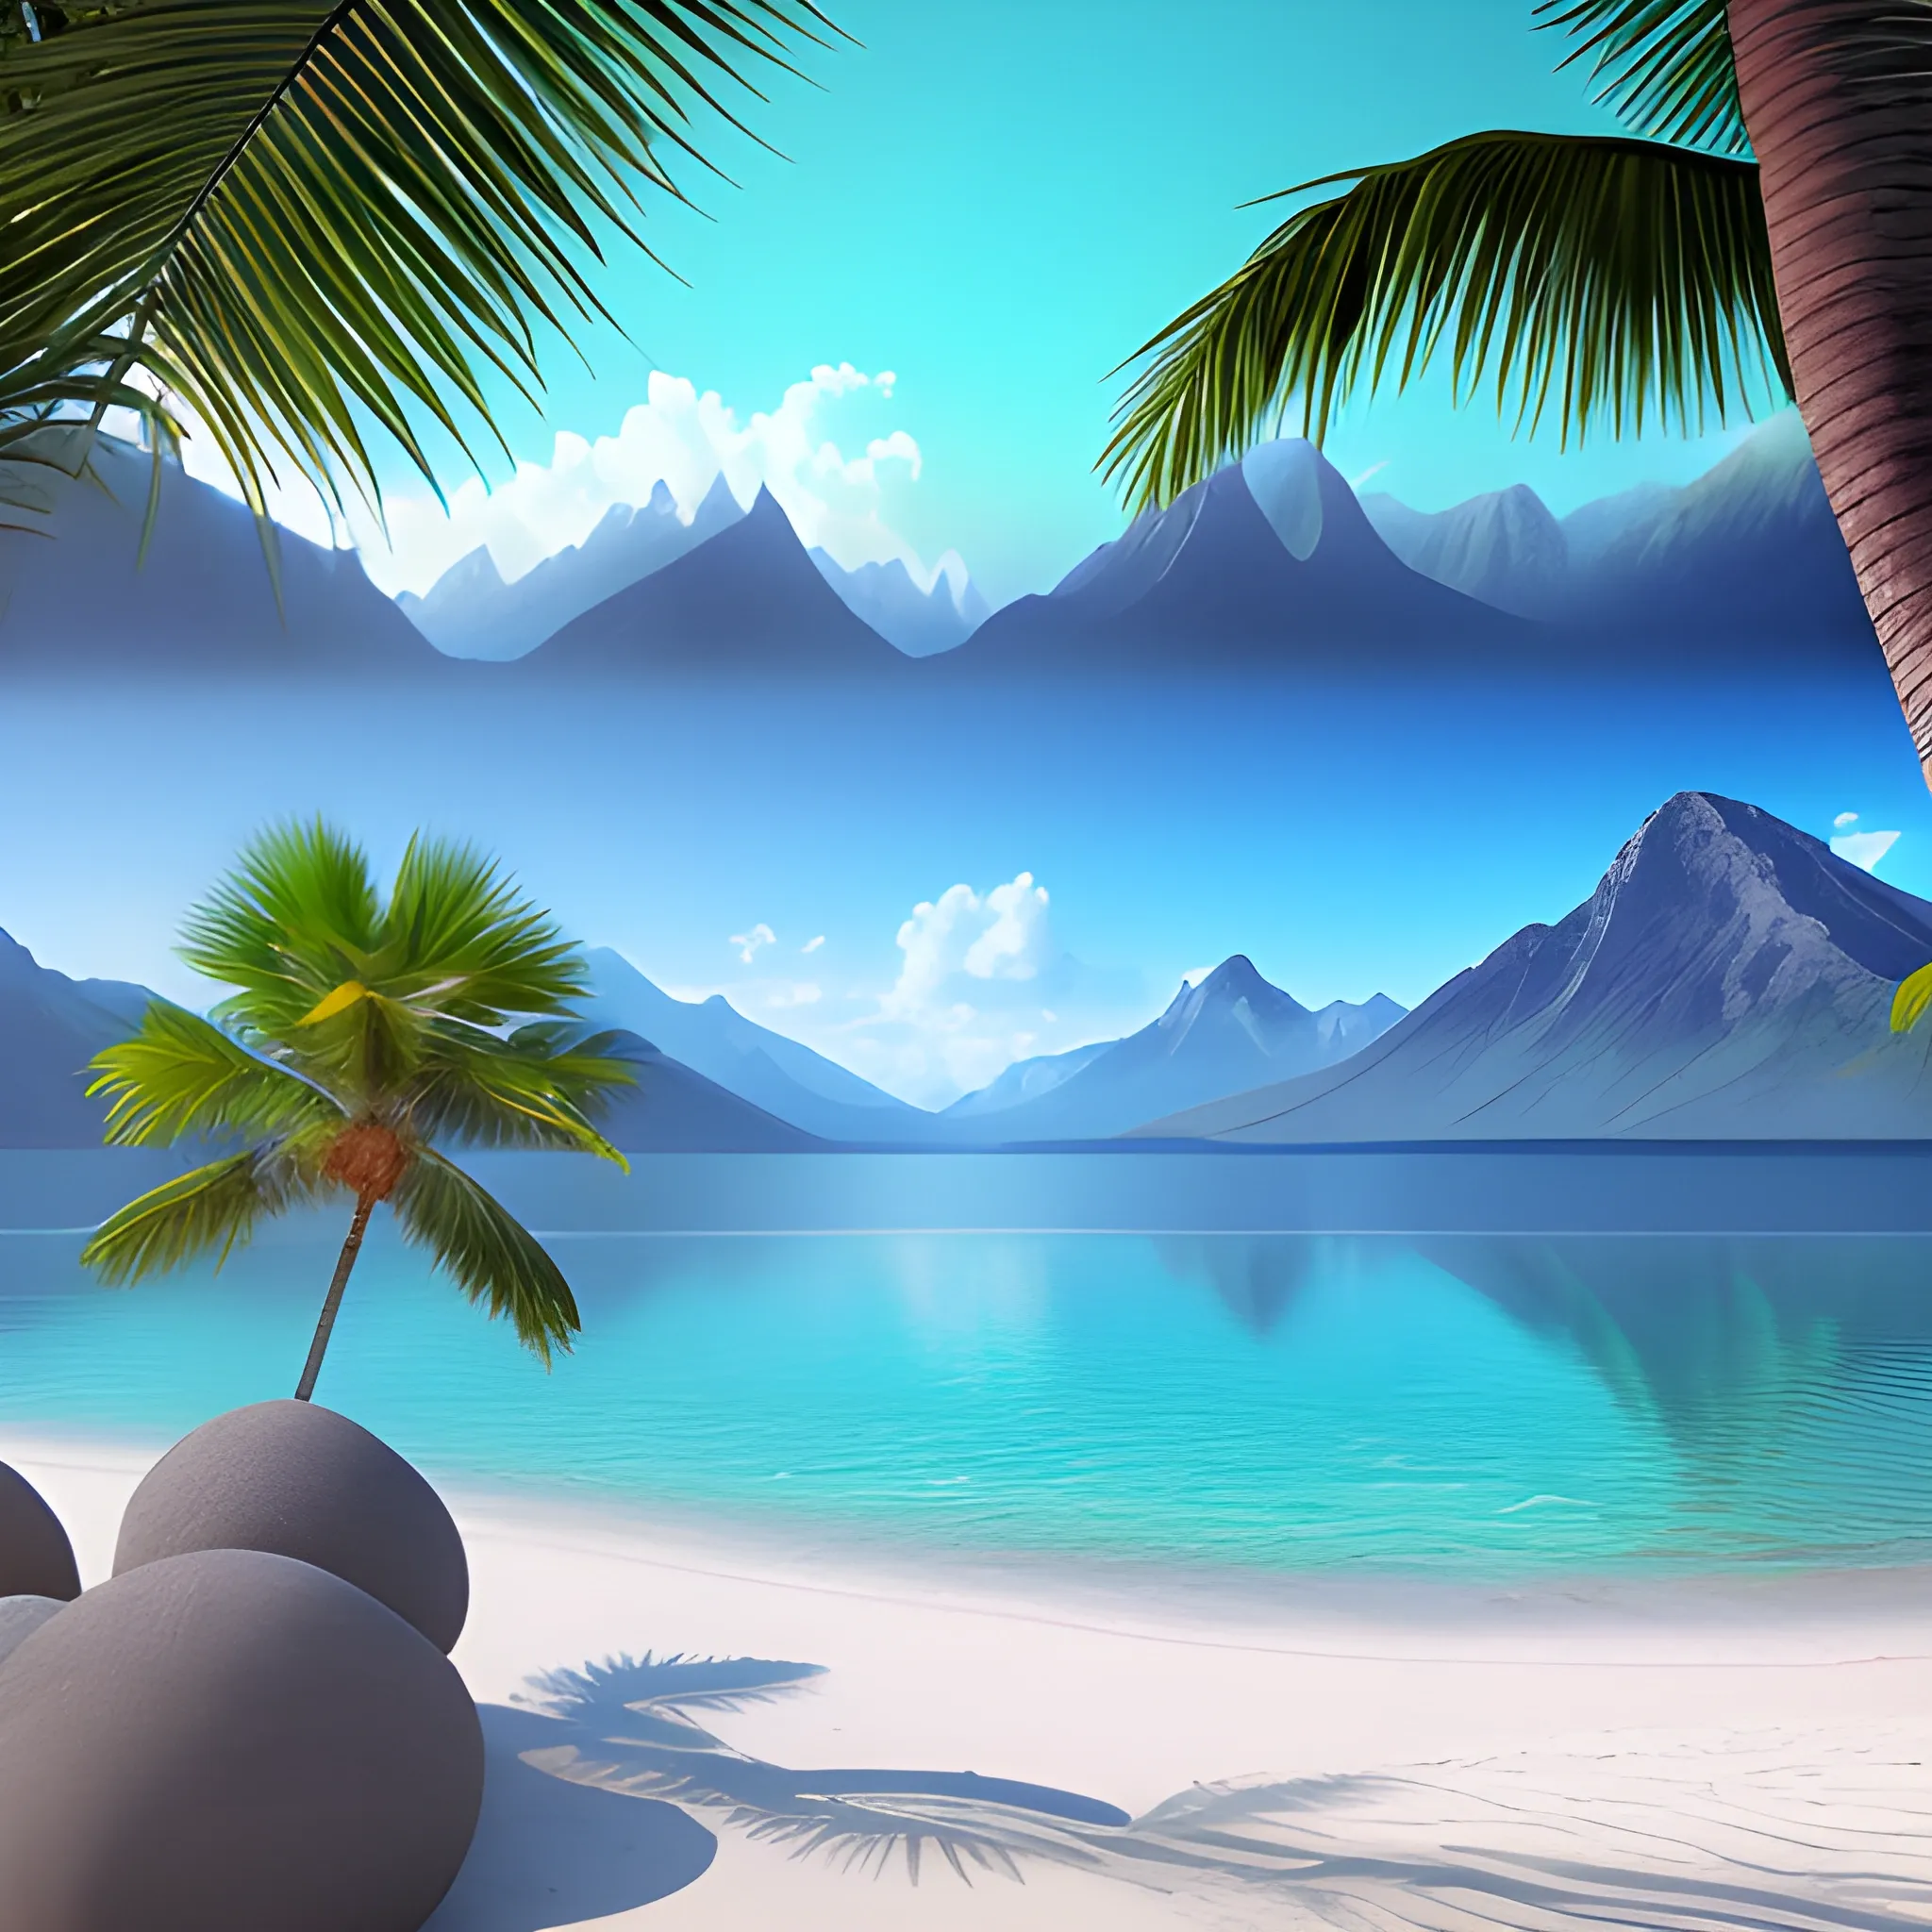 mountains lake water (photorealistic) 8k, beach rest coconuts on palm trees (photorealistic) 8k, relax 
, 3D, 3D, Trippy, Trippy